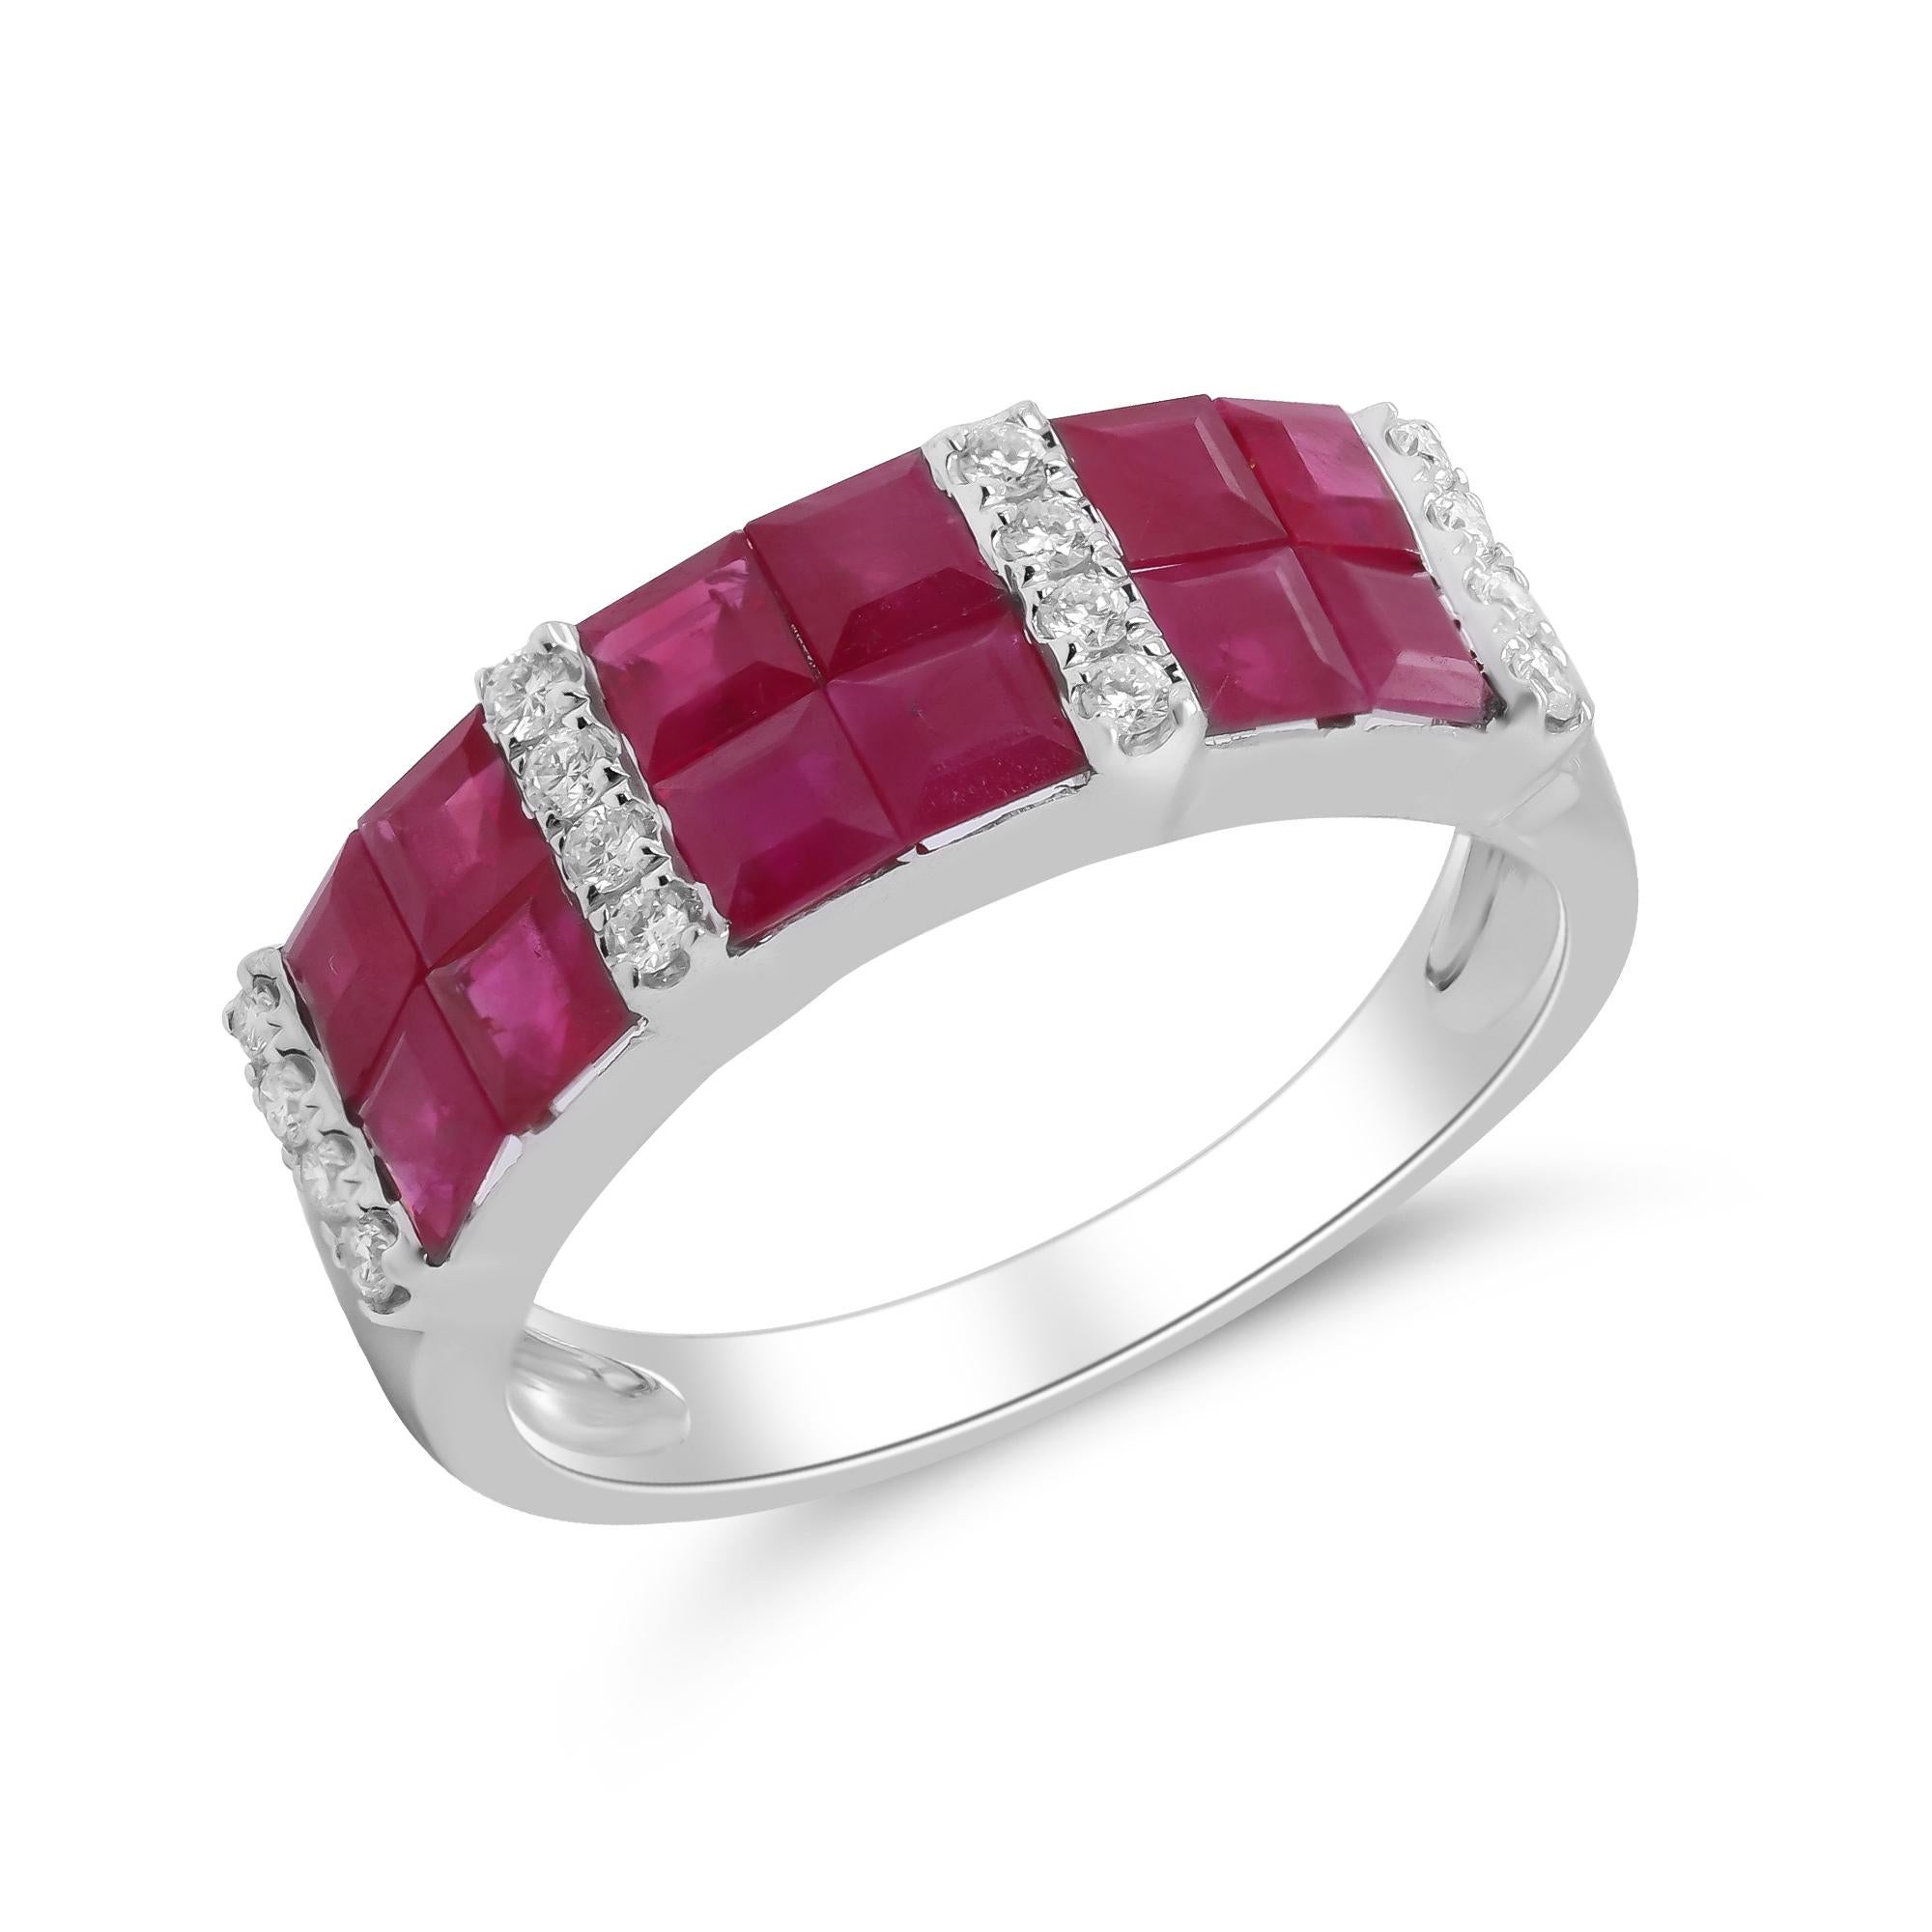 2.29 Carat Square-Cut Ruby with Diamond Accents 18K White Gold Ring In New Condition For Sale In New York, NY